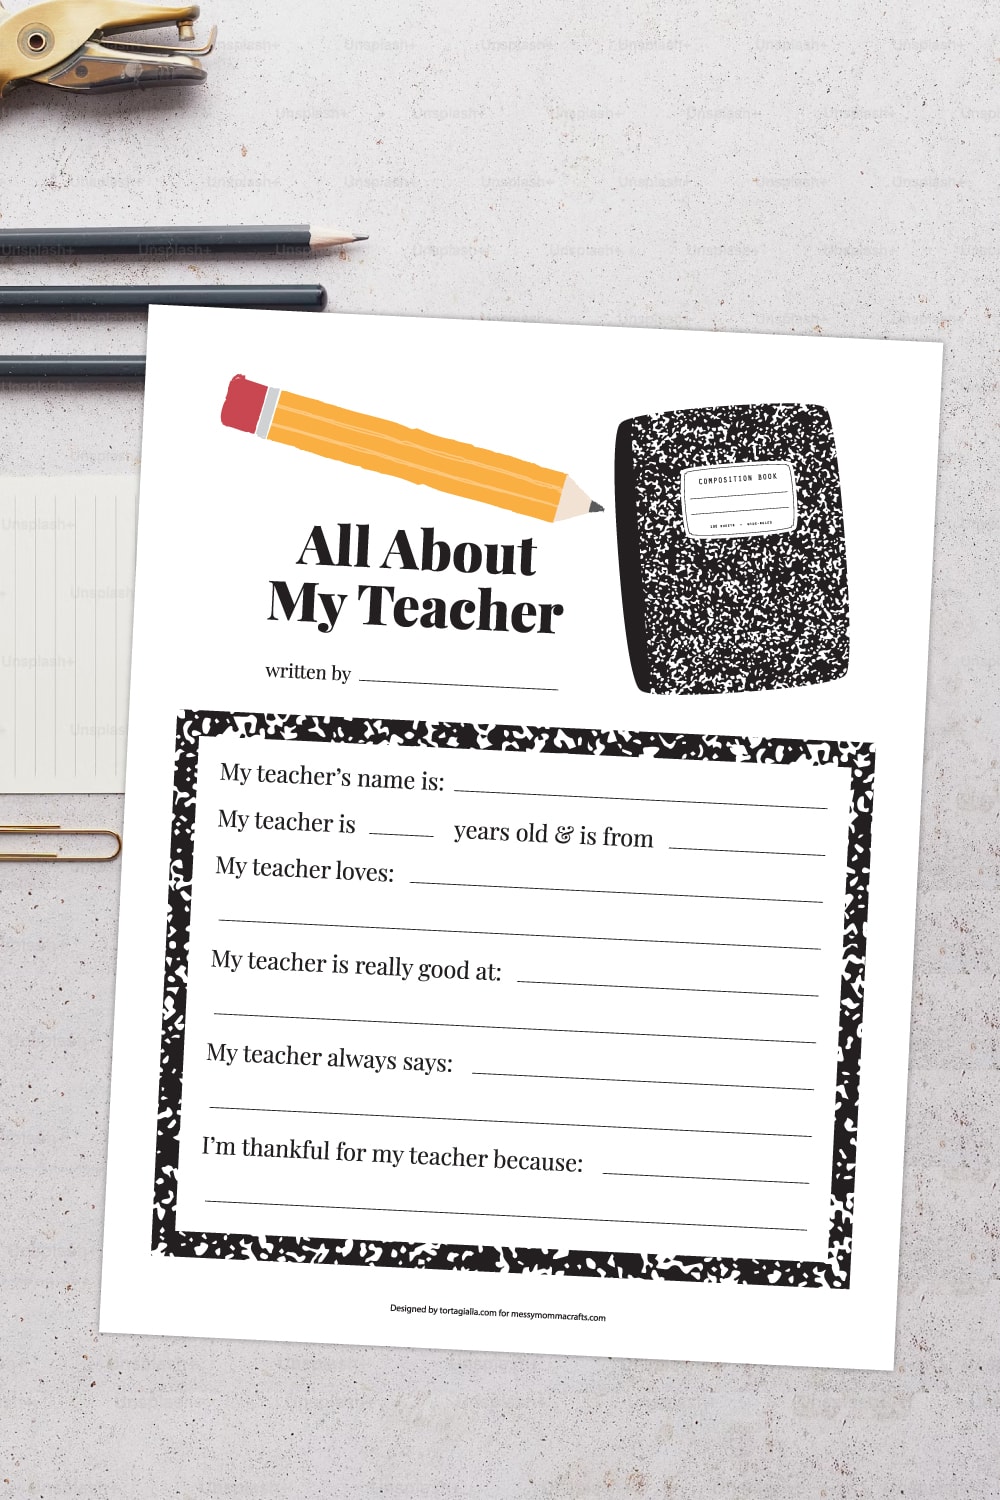 Preview of all about my teacher printable page on concrete background with hole puncher, pencils, lined paper and paperclip on the left side cropped. 